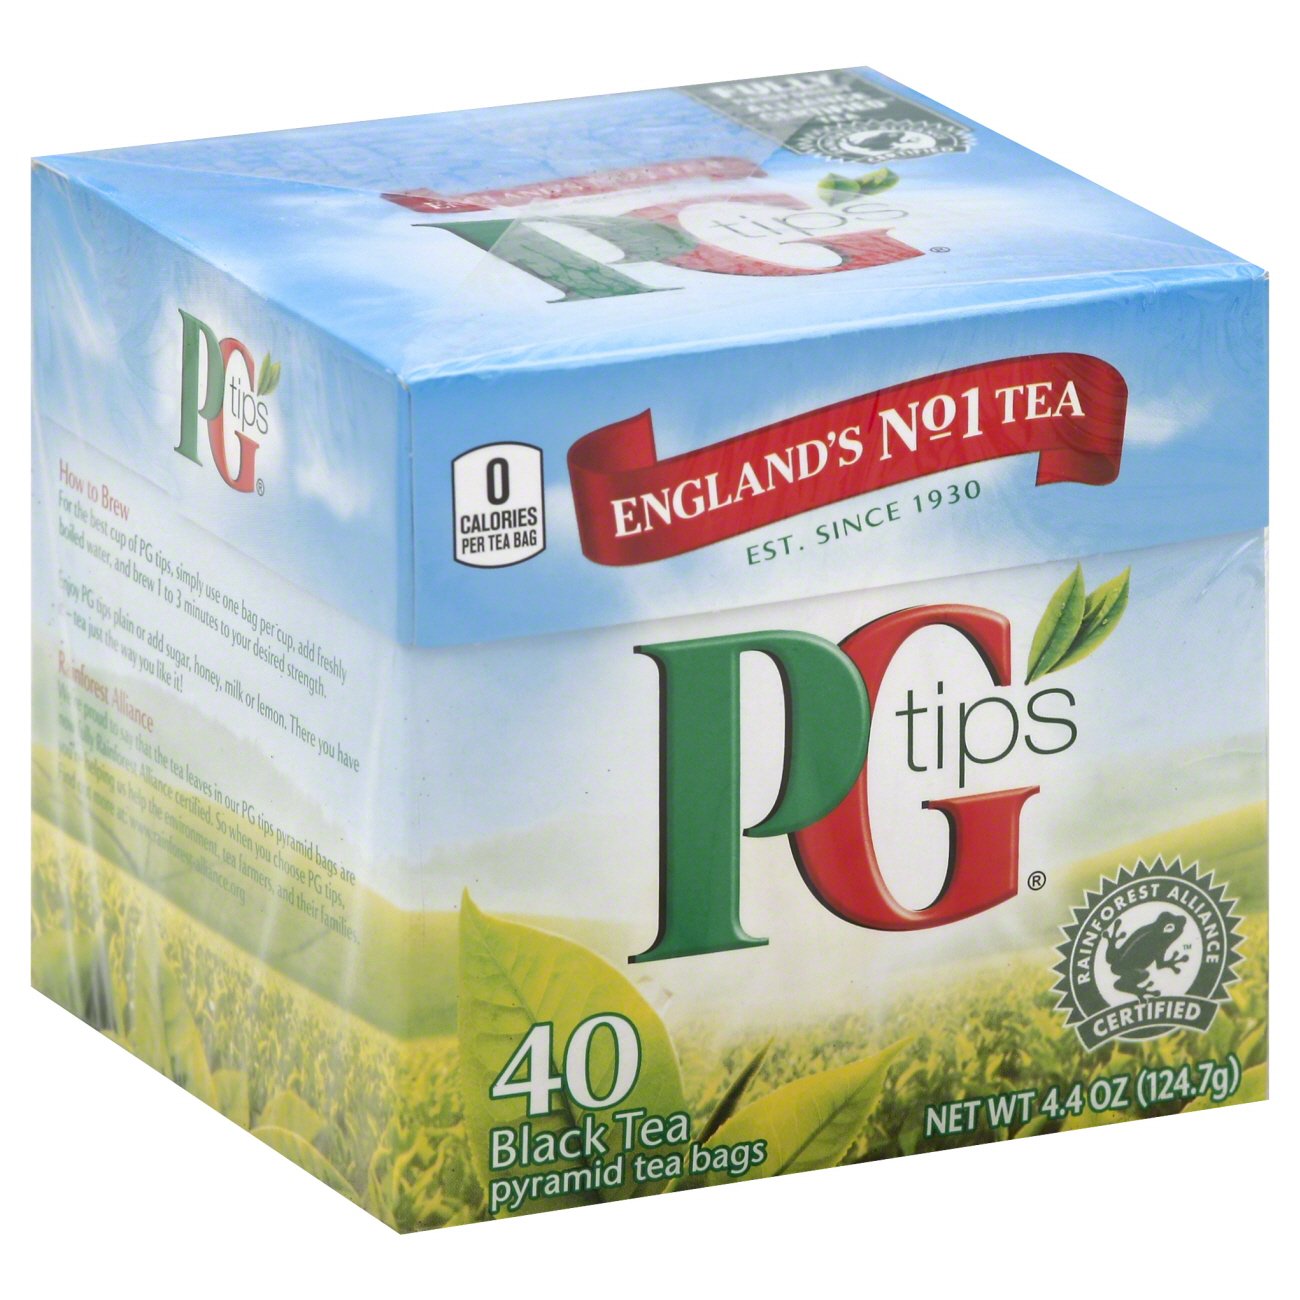 Buy PG Tips Products at Whole Foods Market